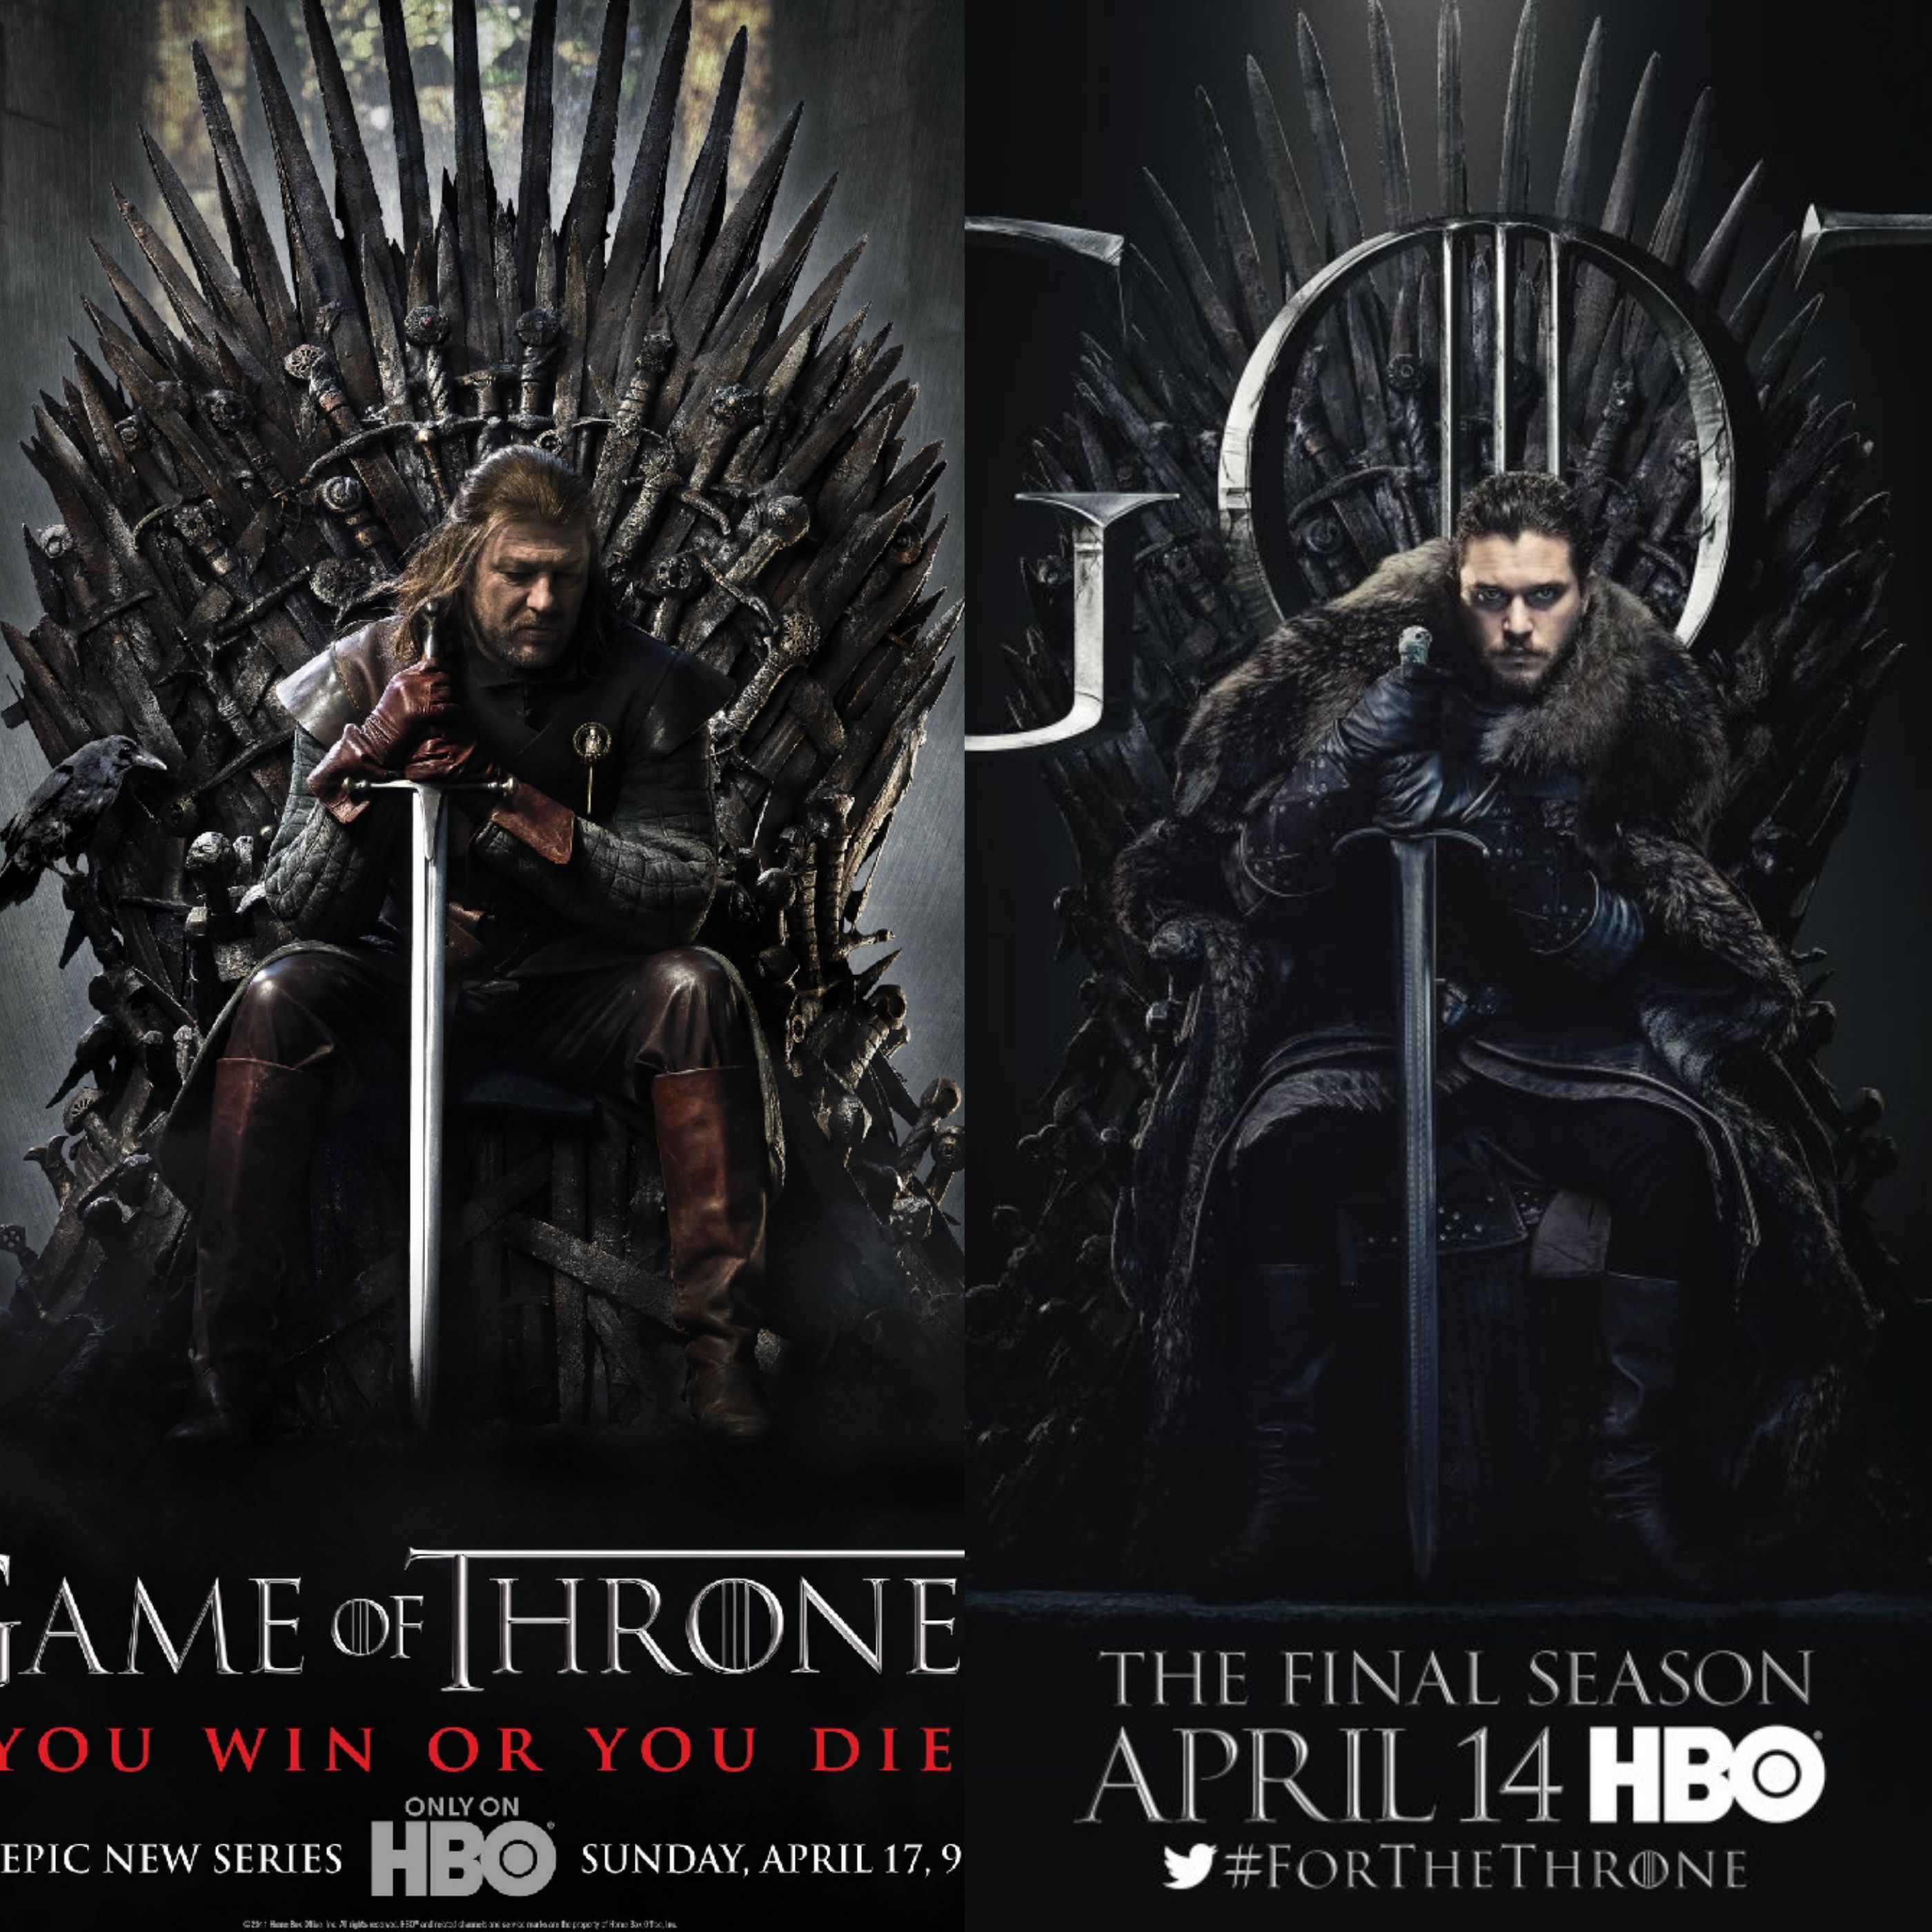 Details about  / H701 Game Of Thrones Season 8 The Final Season TV Series Show Art Poster Decor